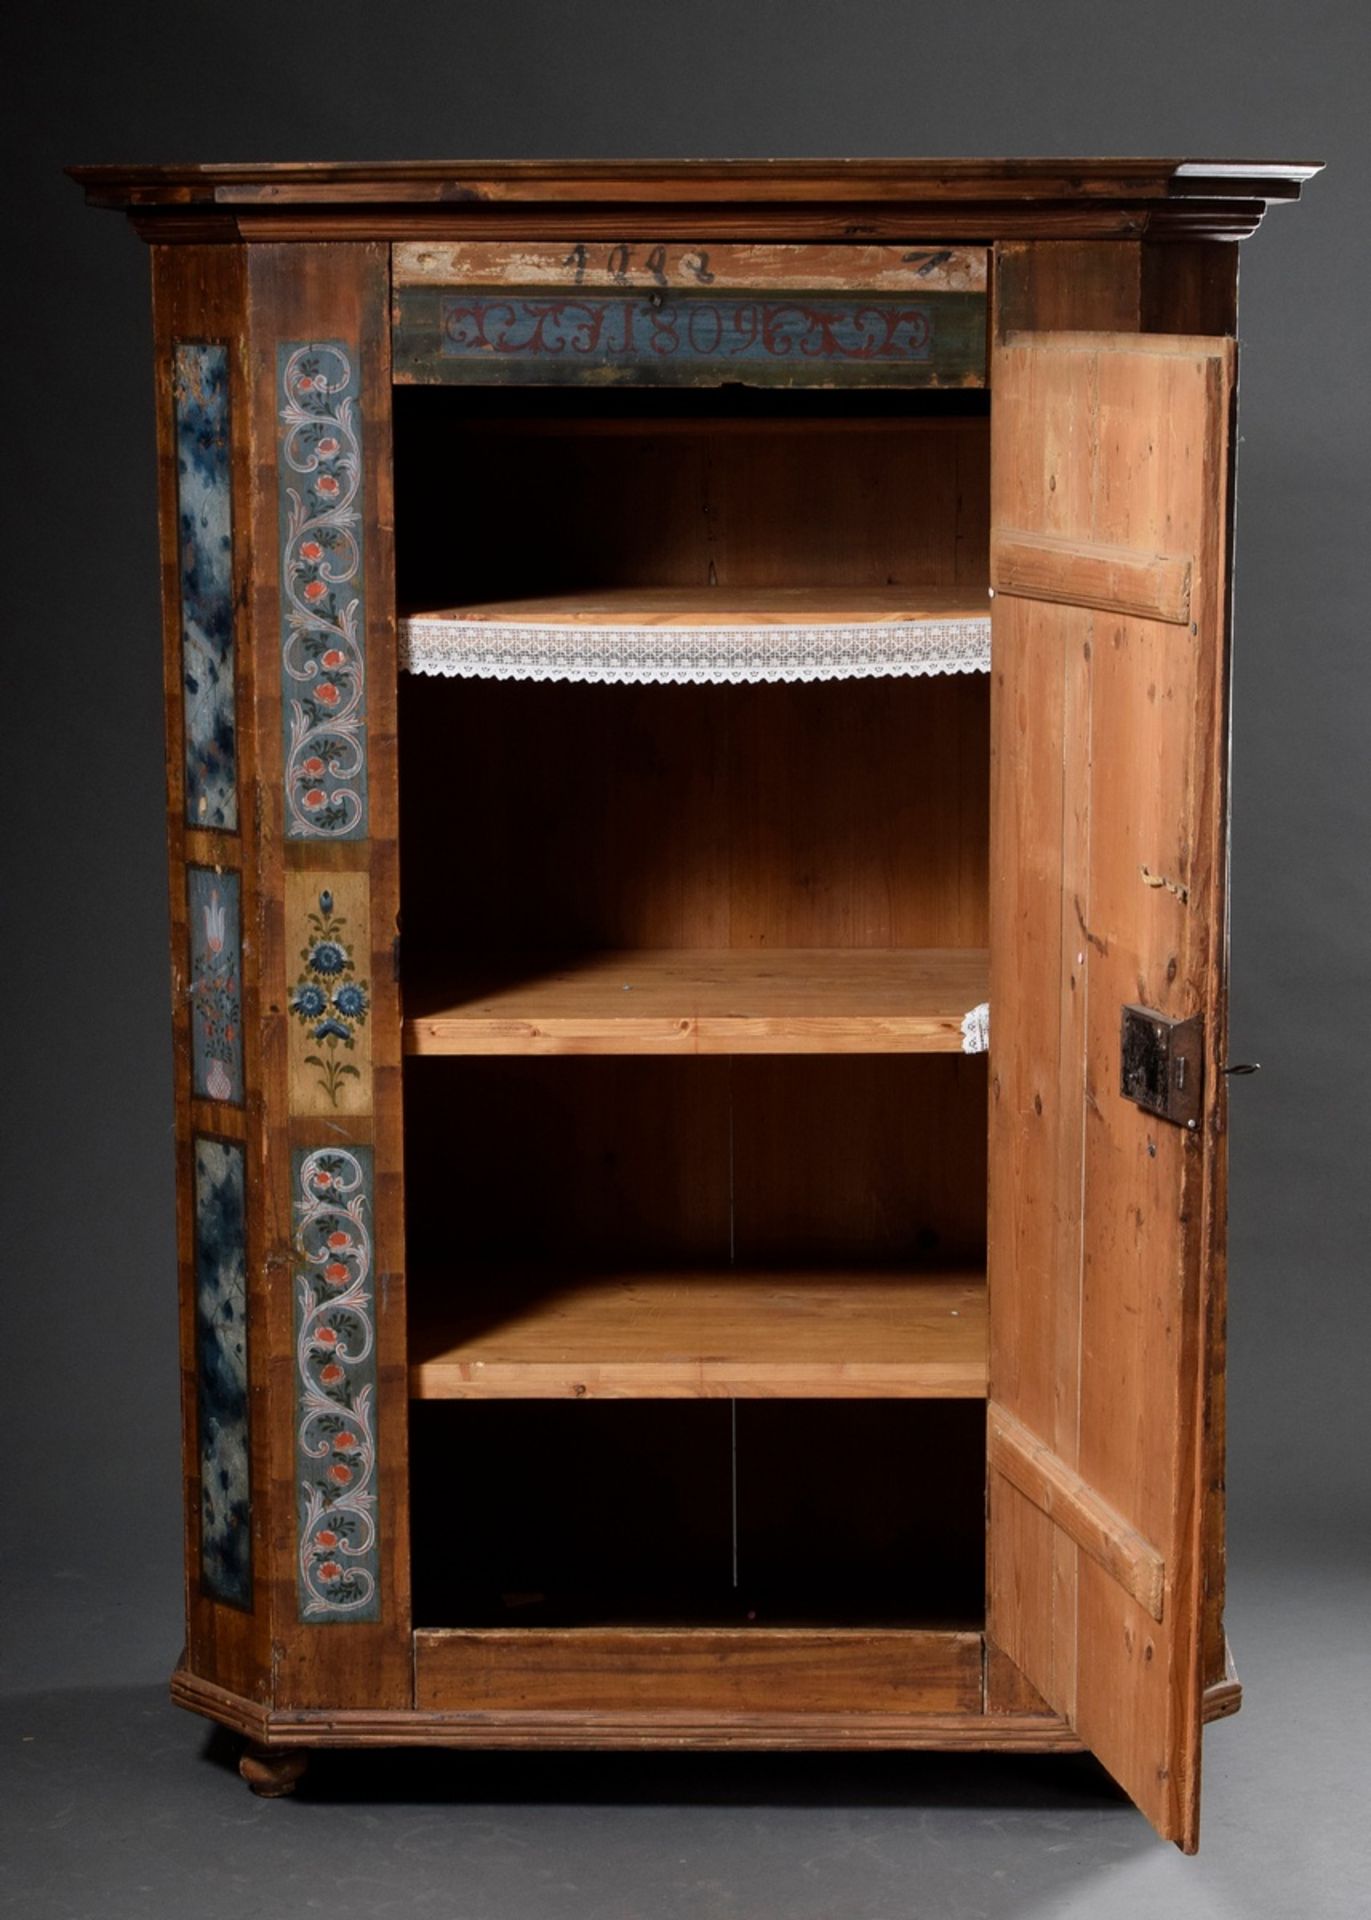 Small single-door Alpine peasant cabinet with floral painting, dated 1809, softwood, 176x91x65cm - Image 2 of 11